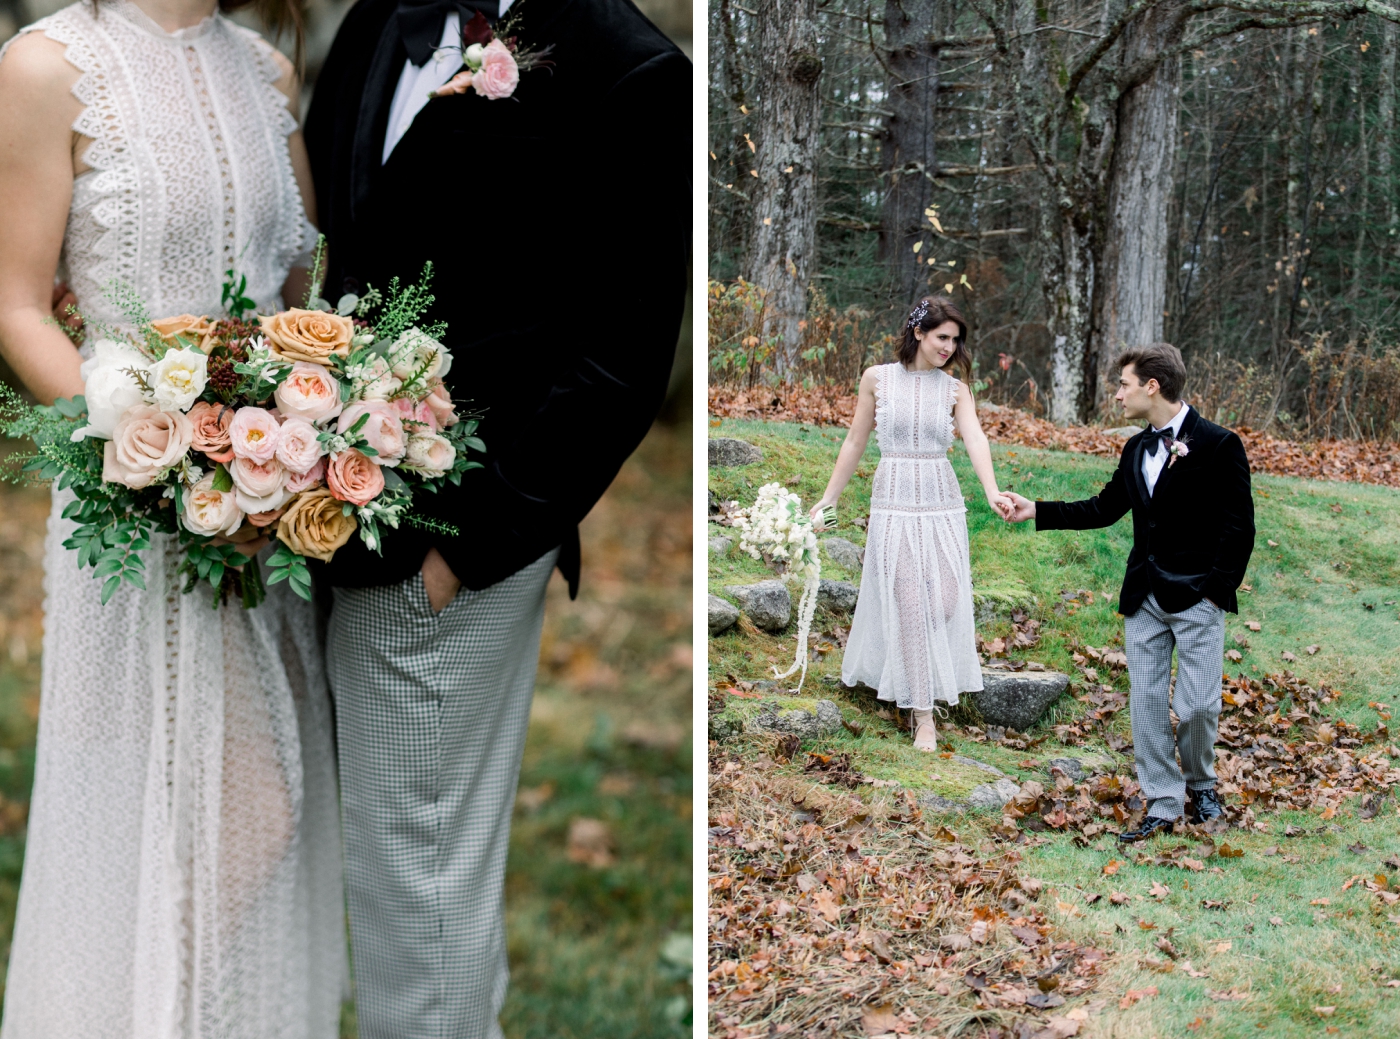 New Hampshire wedding planning by Events By Sorrell